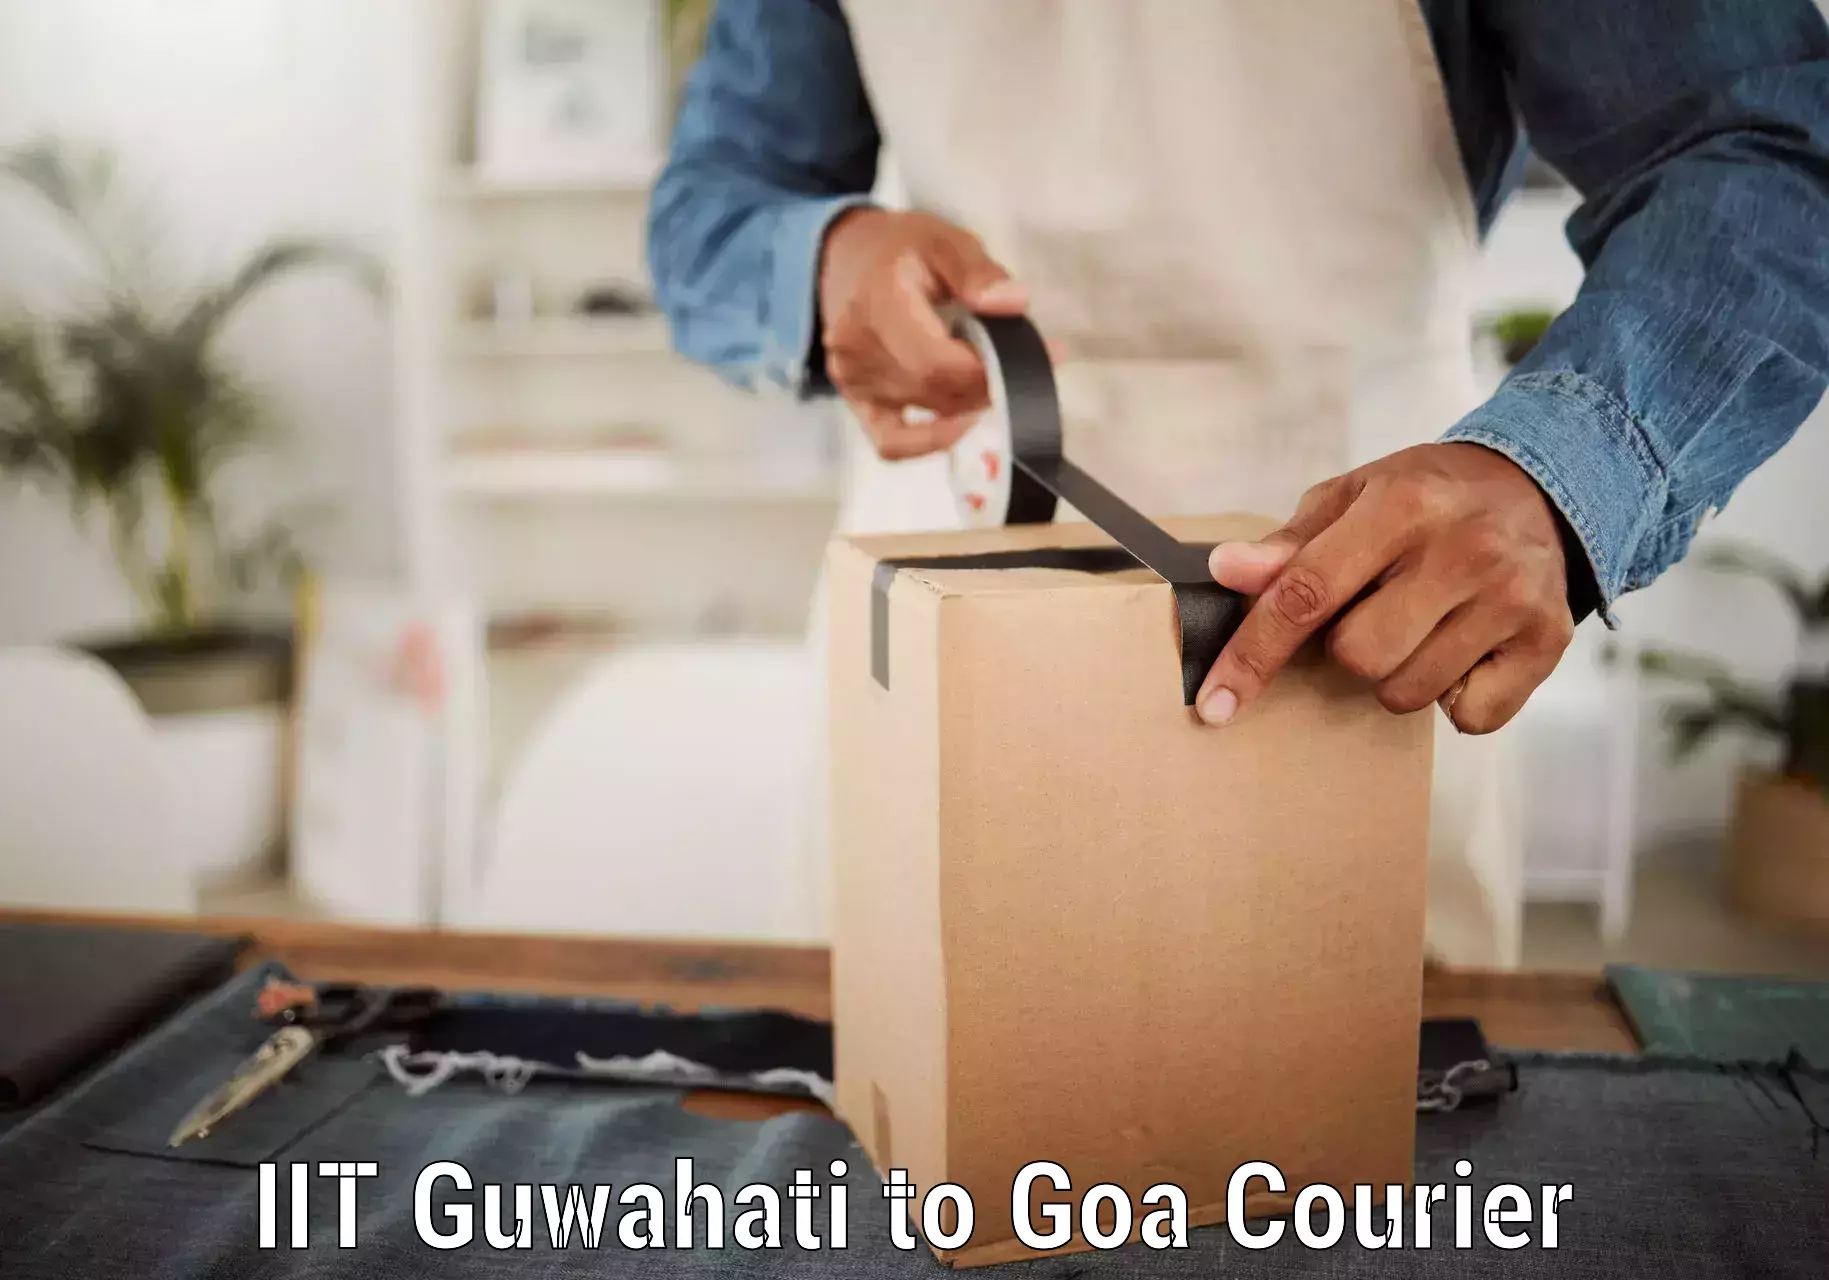 Cash on delivery service IIT Guwahati to Goa